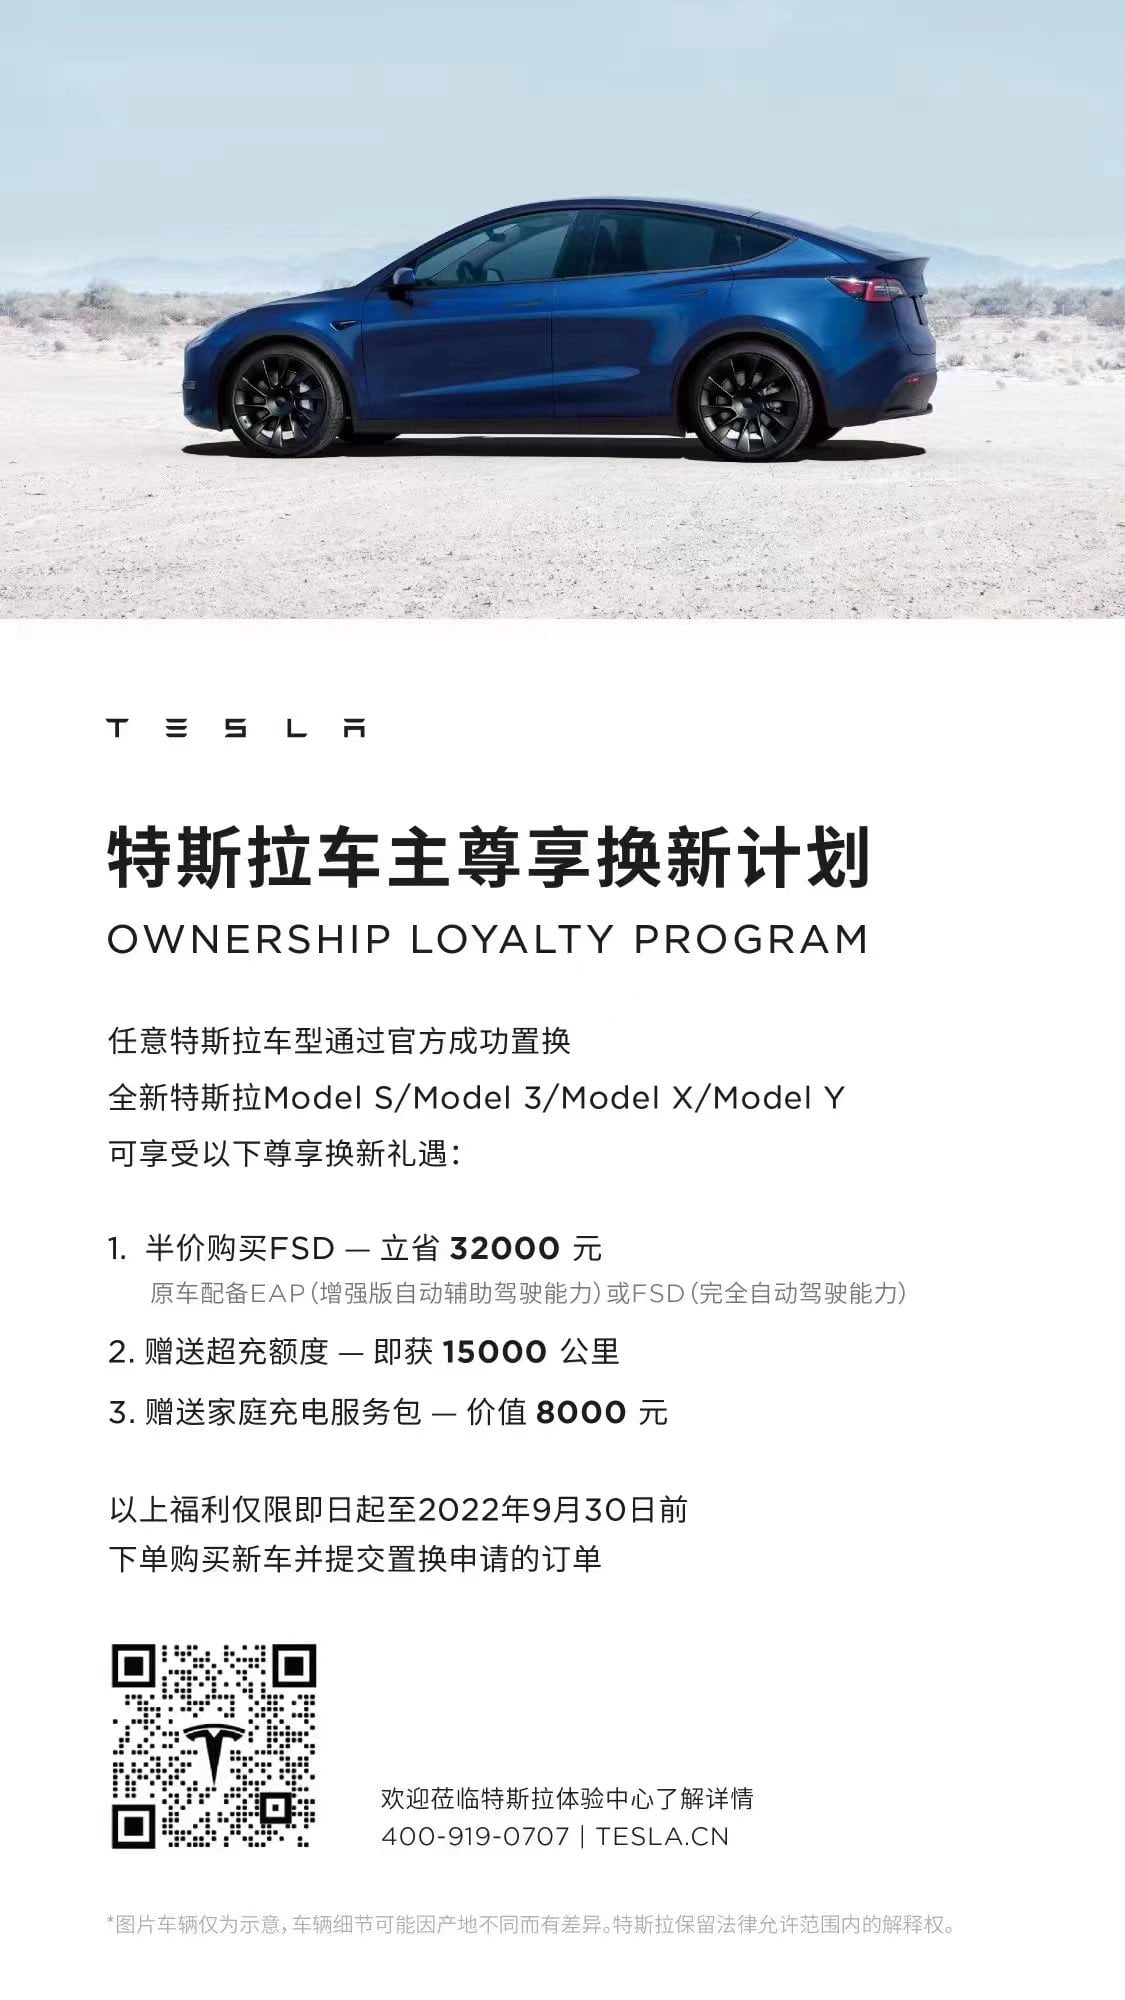 Tesla is offering returning customers a significant discount on FSD